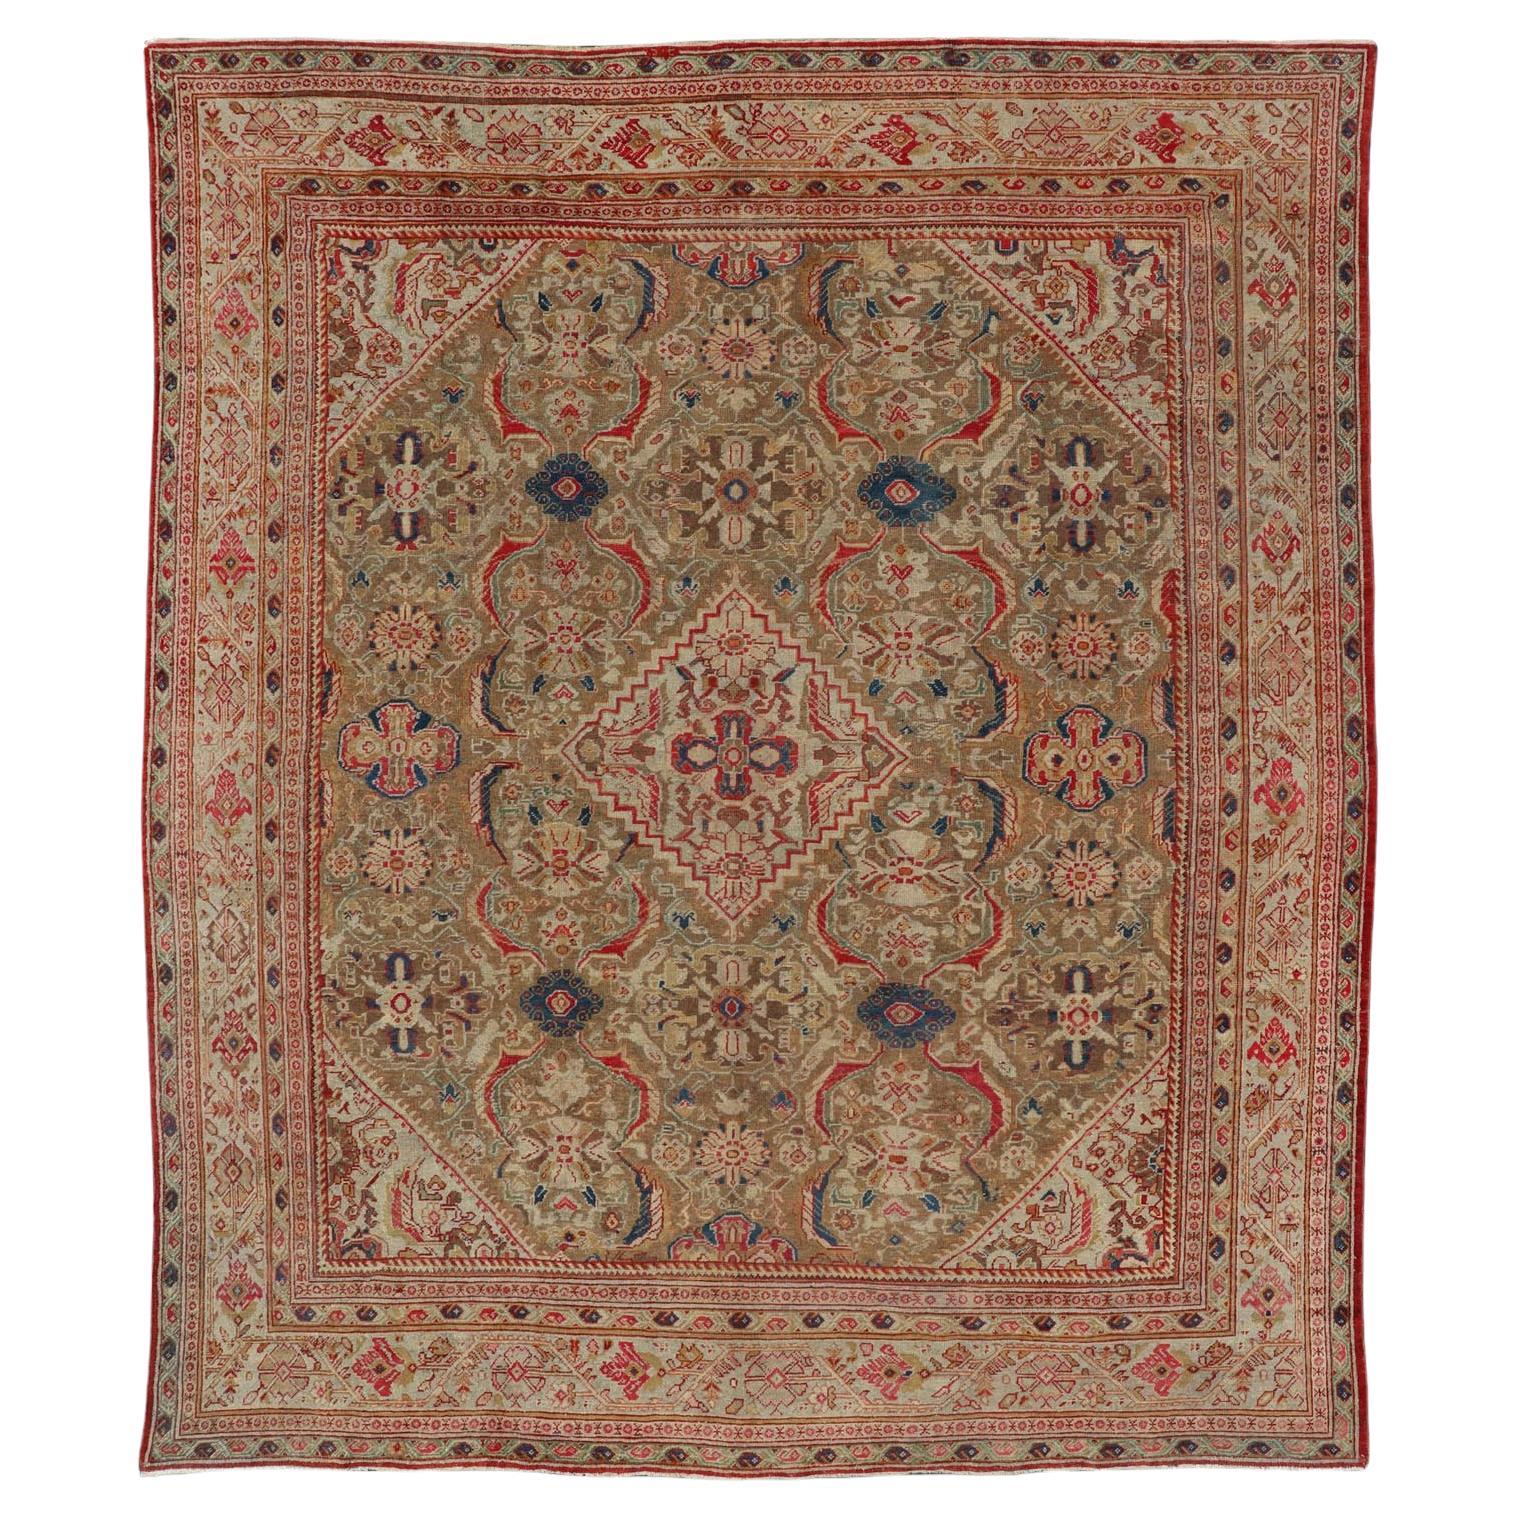 Antique Persian Sultanabad Carpet with Geometric Design In Green, Blue and Red For Sale